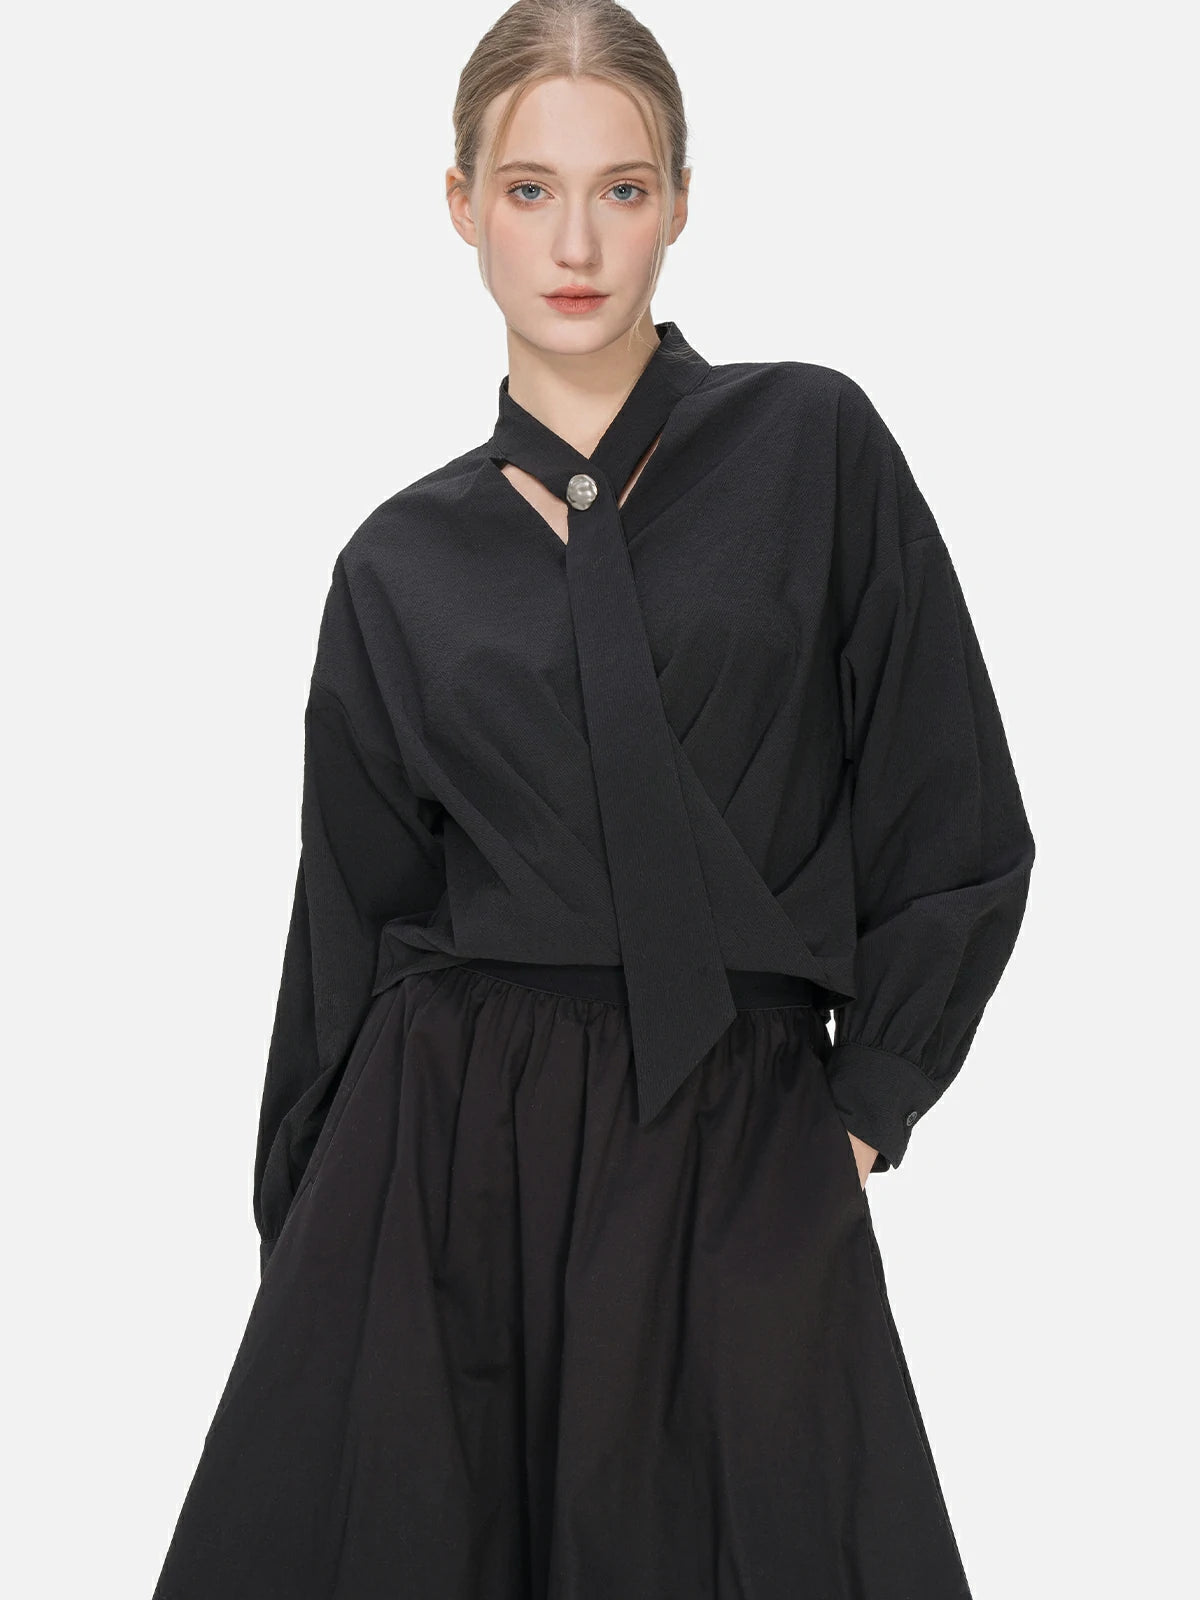 Fashionable silhouette in a V-neck blouse with unique cascading ribbons and a cross-pleat hem.